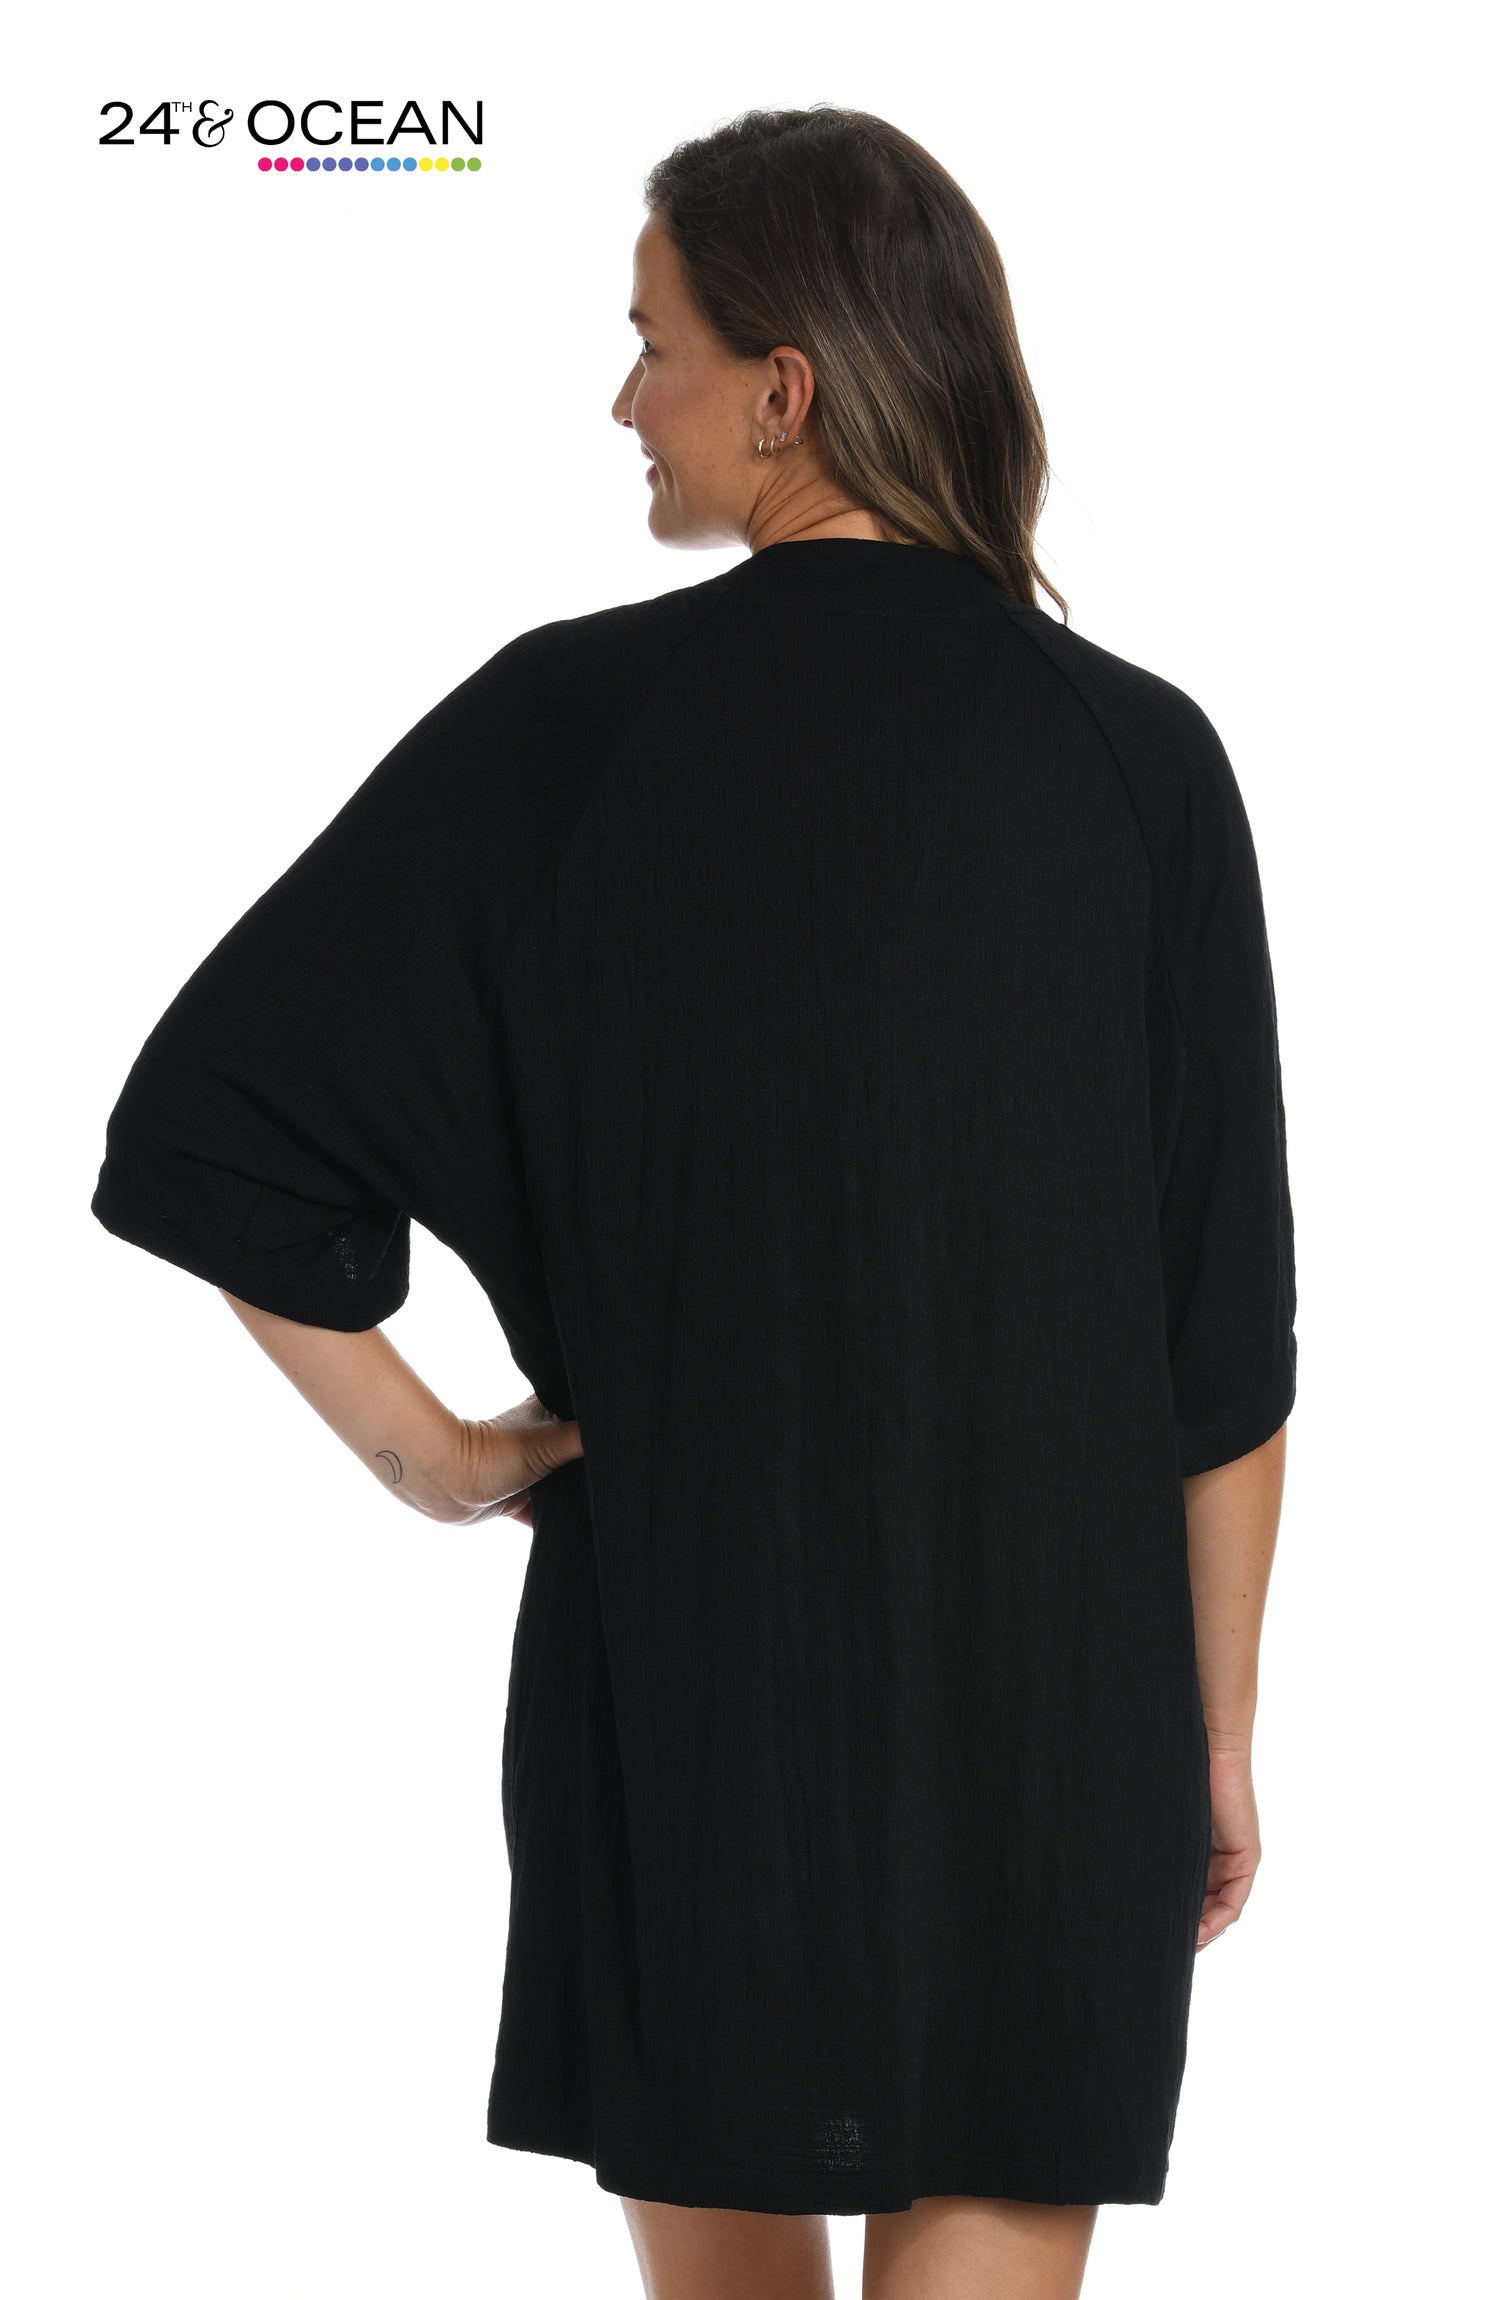 Model is wearing a solid black colored lace front tunic cover up from our 24th & Ocean brand.